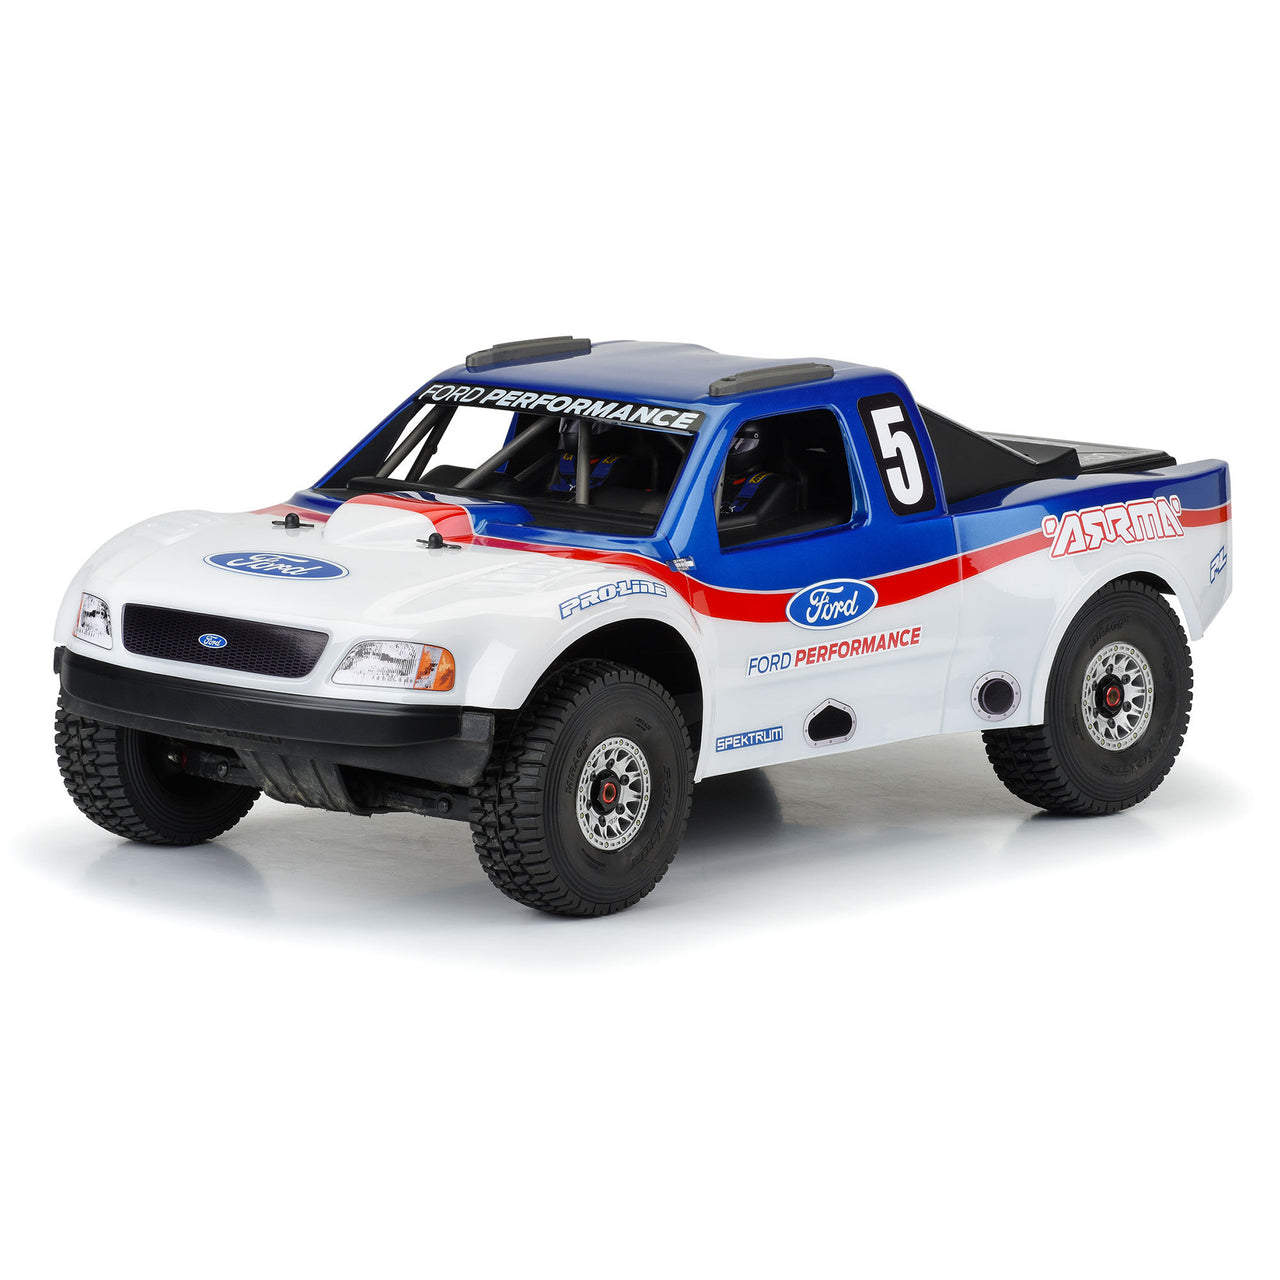 PRO361817 1/7 Pre-Cut 1997 Ford F-150 Trophy Truck Clear Body: Mojave 6S